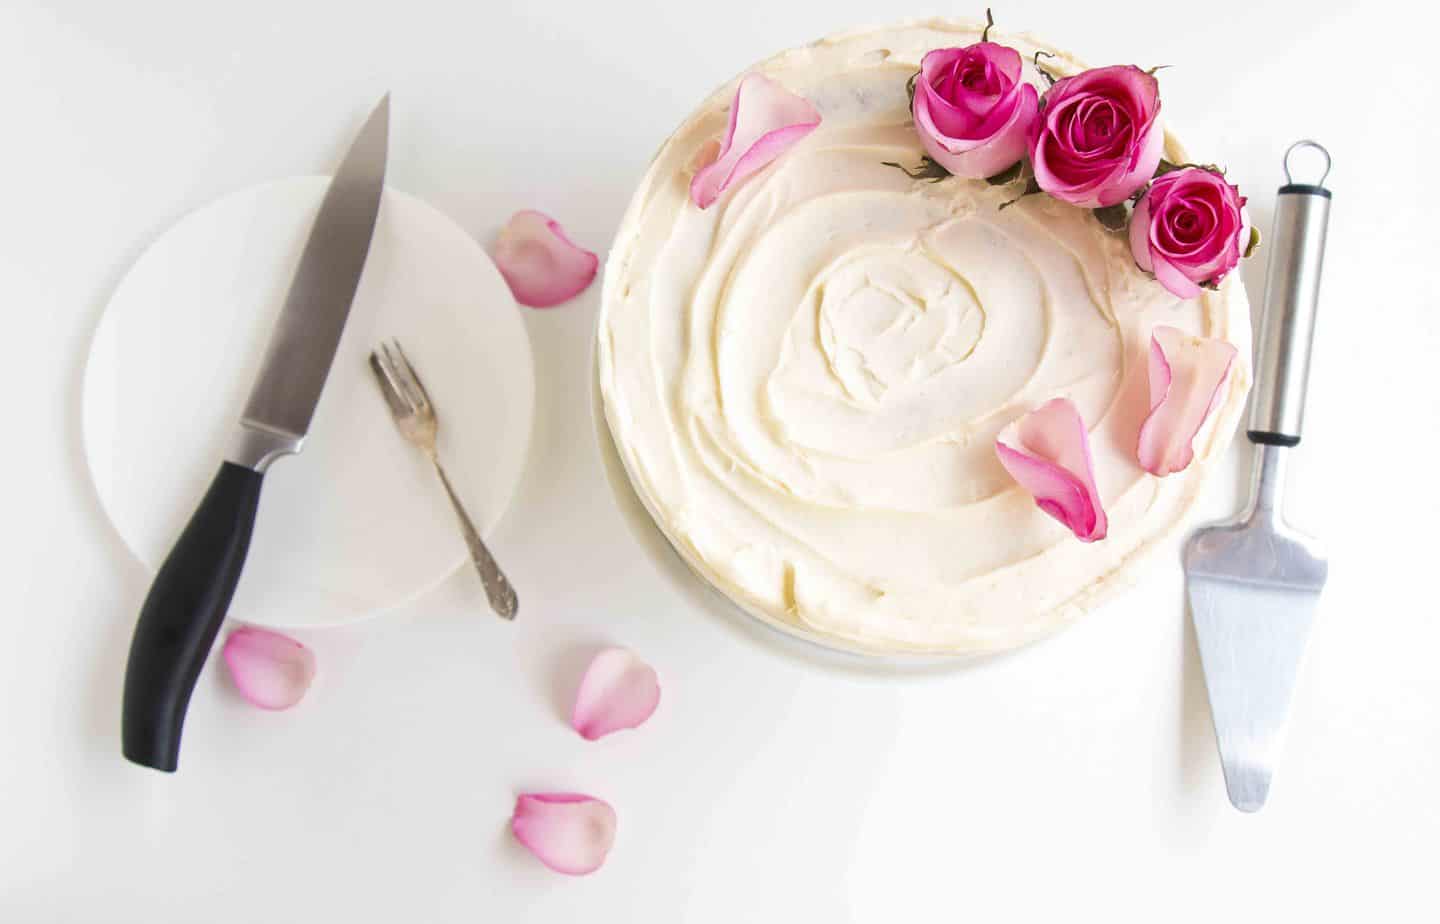 A frosted cake topped with fresh roses.